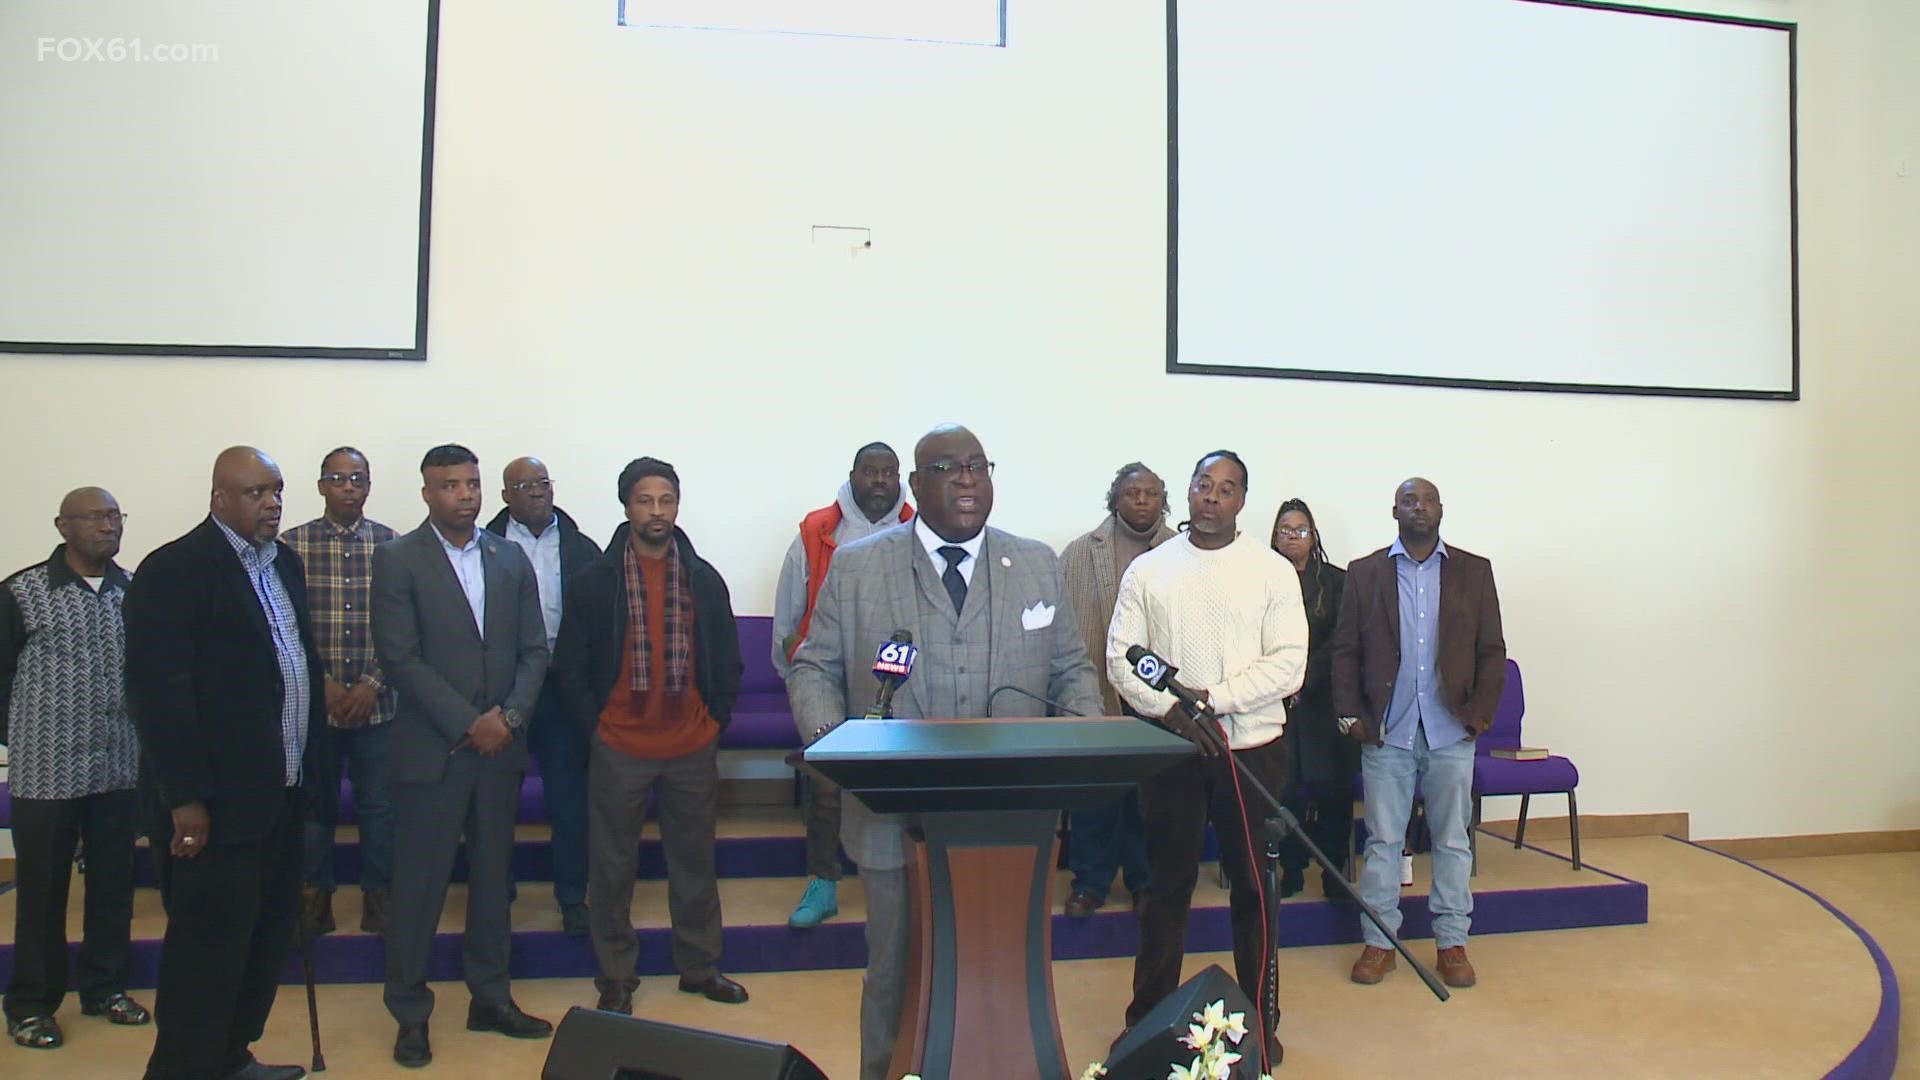 The clergy said they have come up with a plan that they'll present to the city on Thursday.